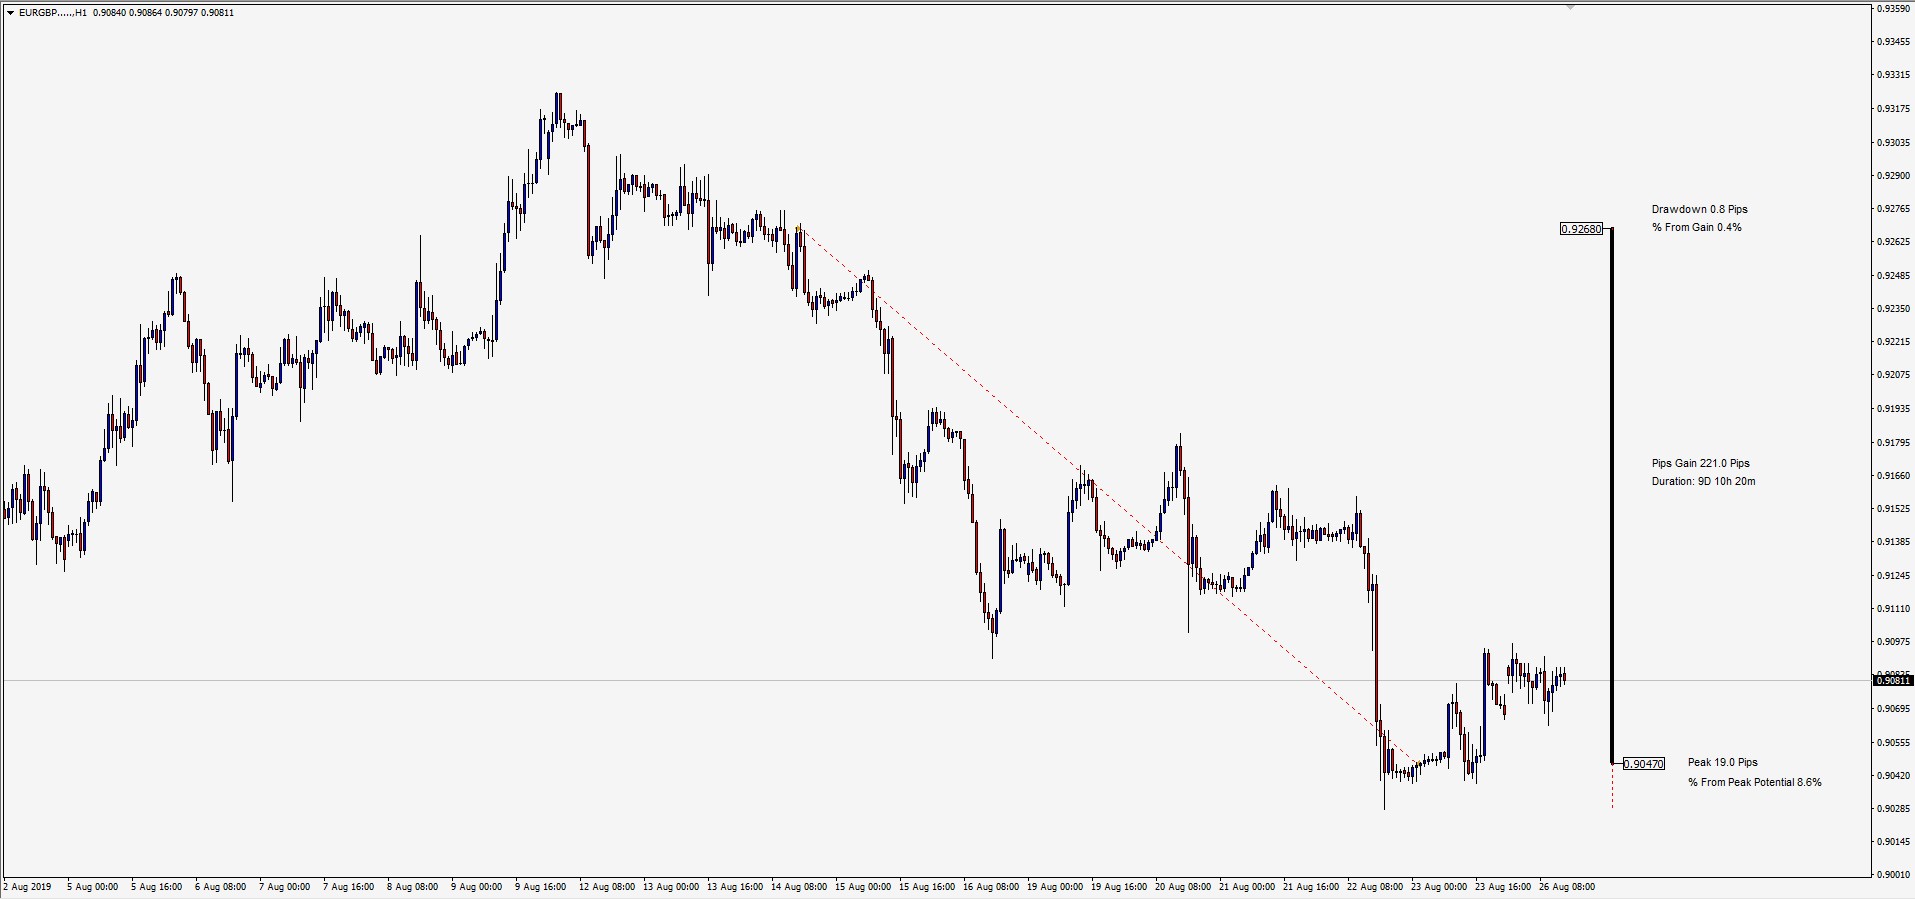 Trade Of The Week - 220 Pips on EUR/GBP